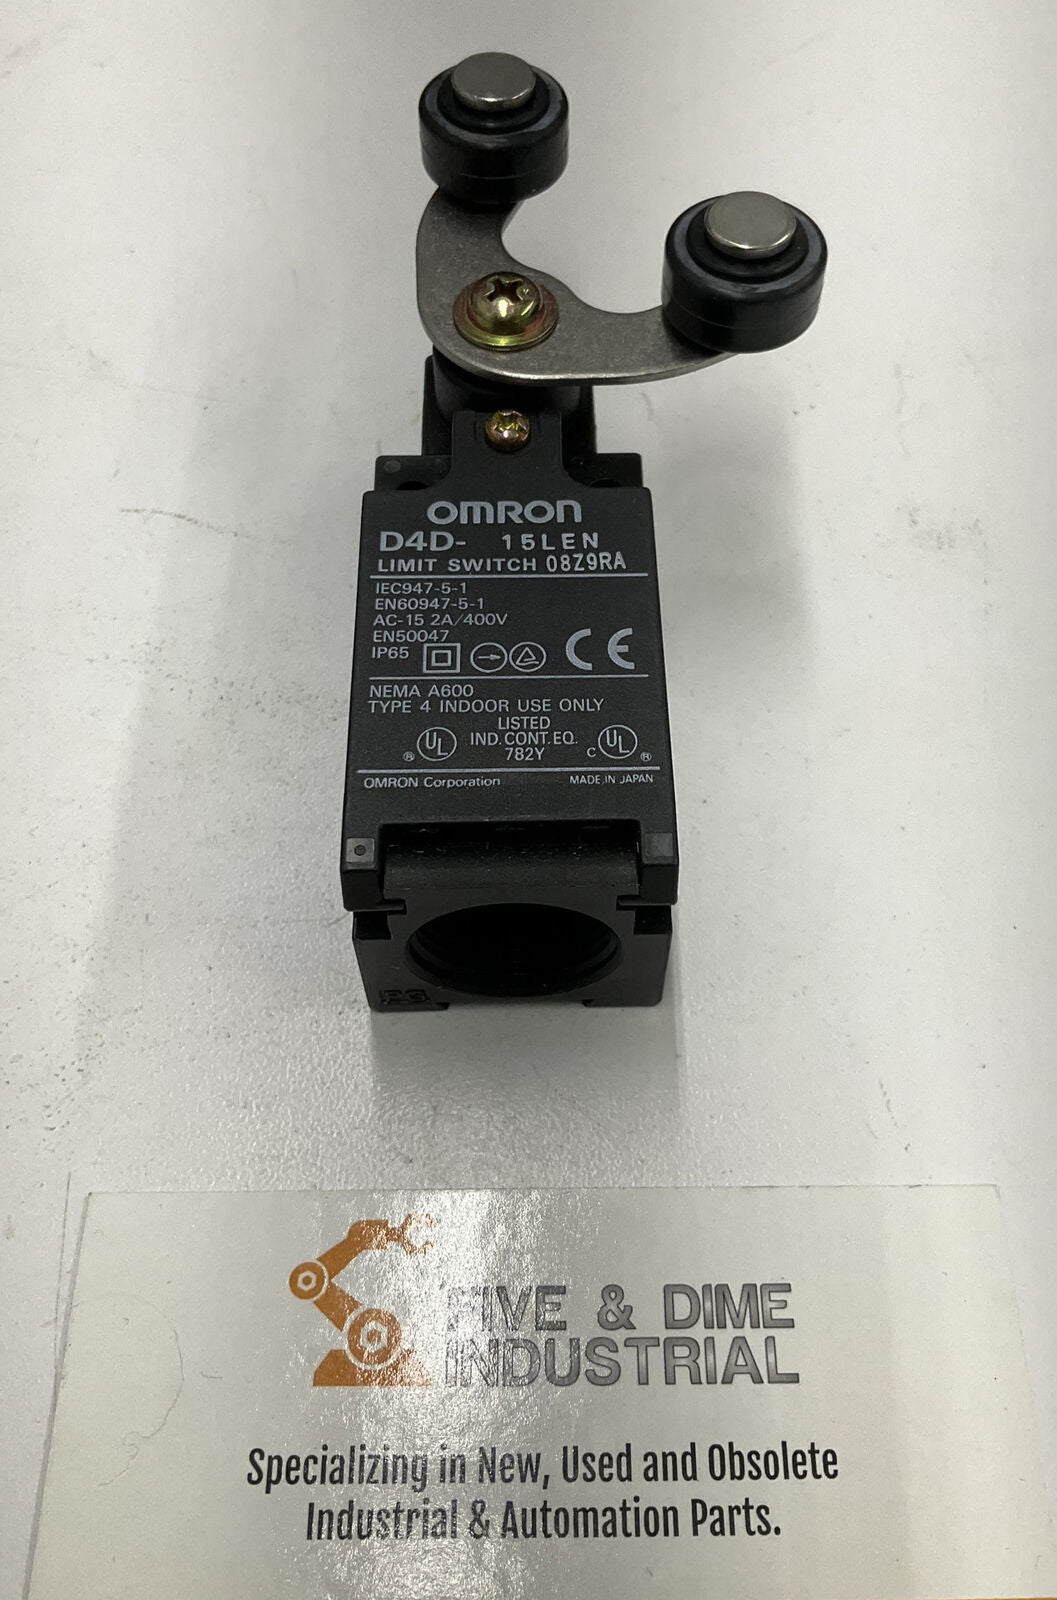 OMRON D4D-15LEN New Safety Limit Switch (RE104) - 0